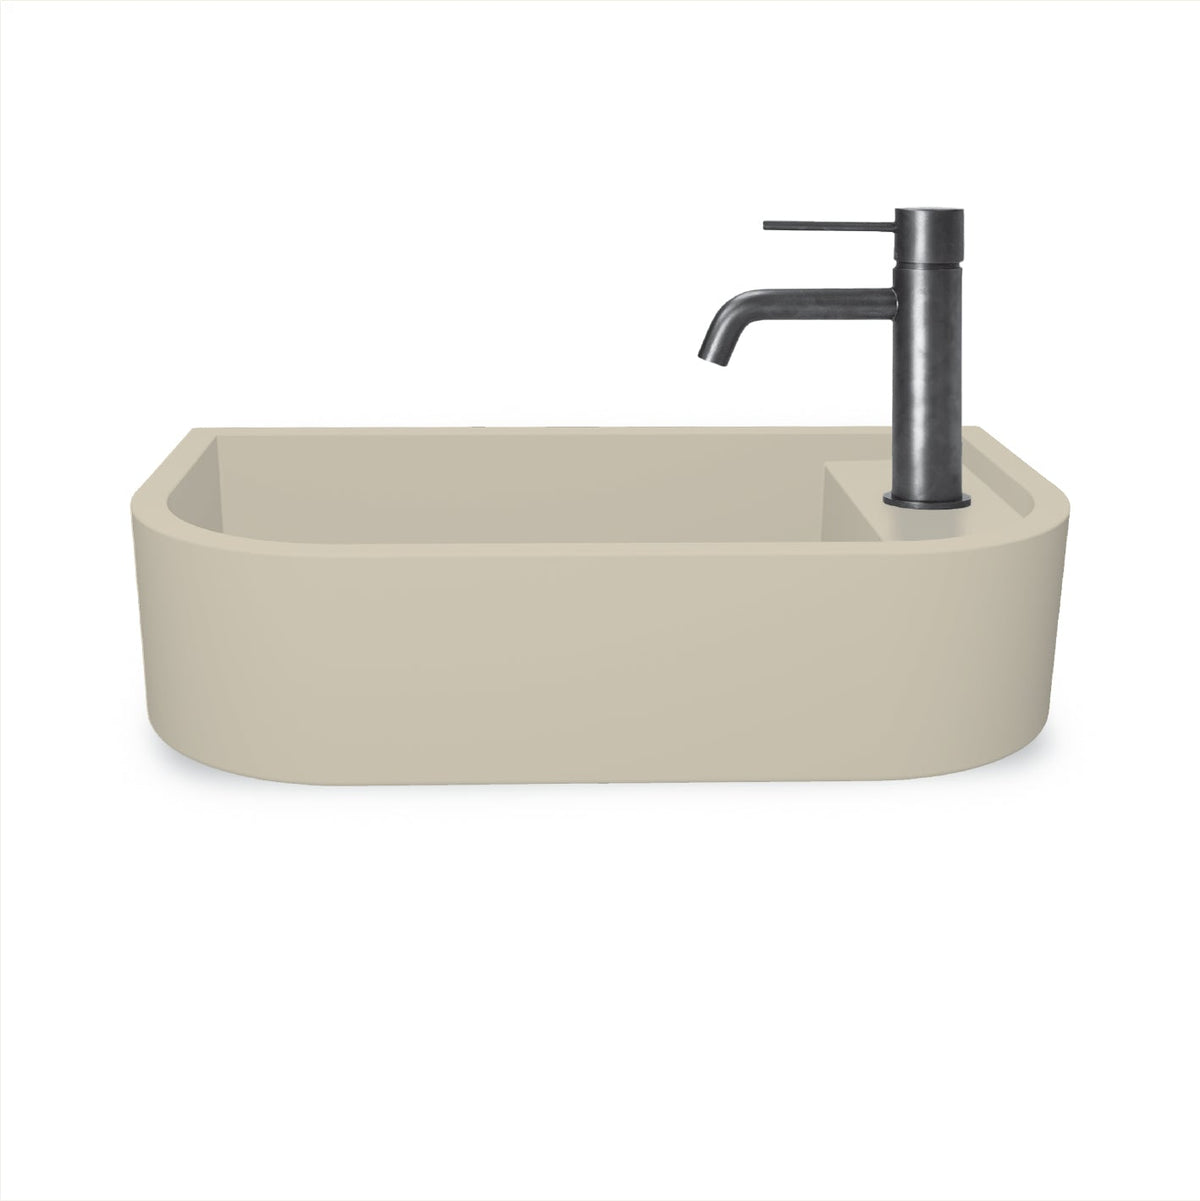 Loop 02 Basin - Overflow - Wall Hung (Sand,Tap Hole,Brass)